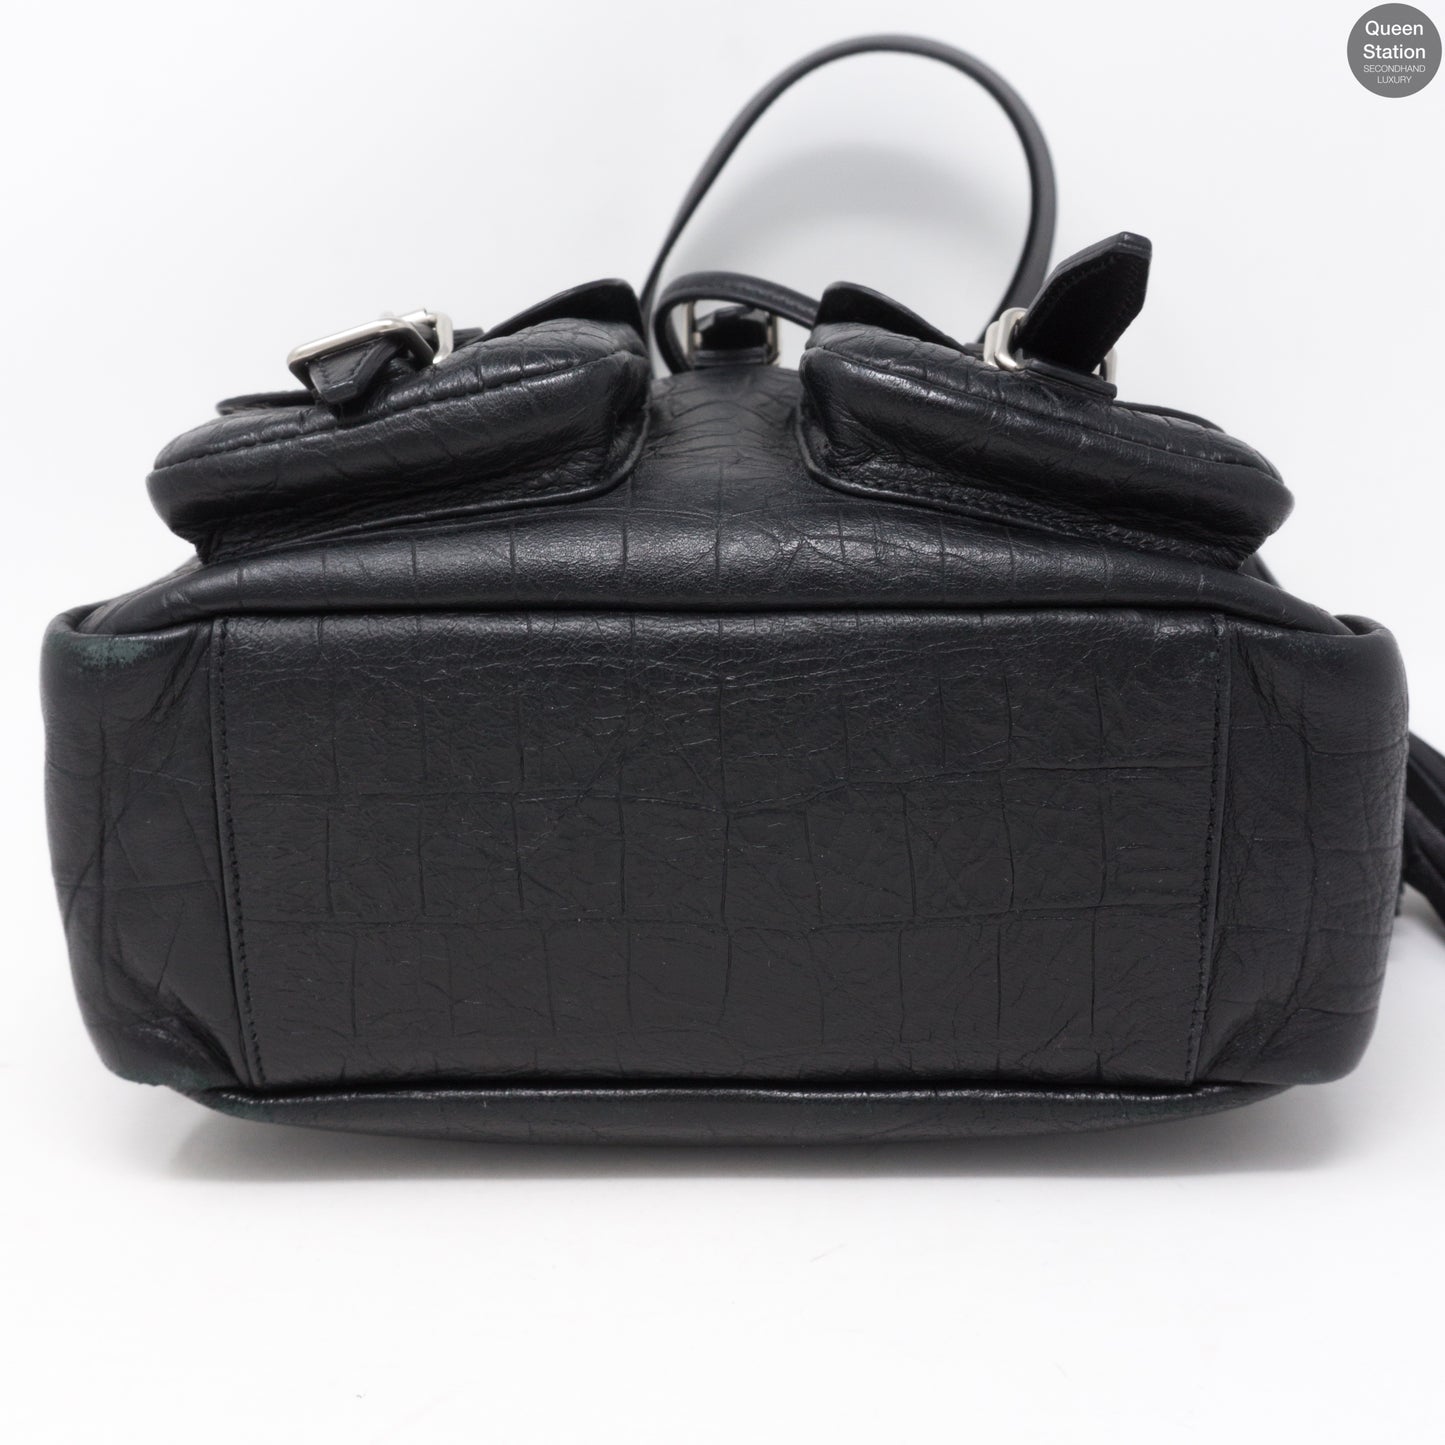 Small Festival Backpack Black Leather